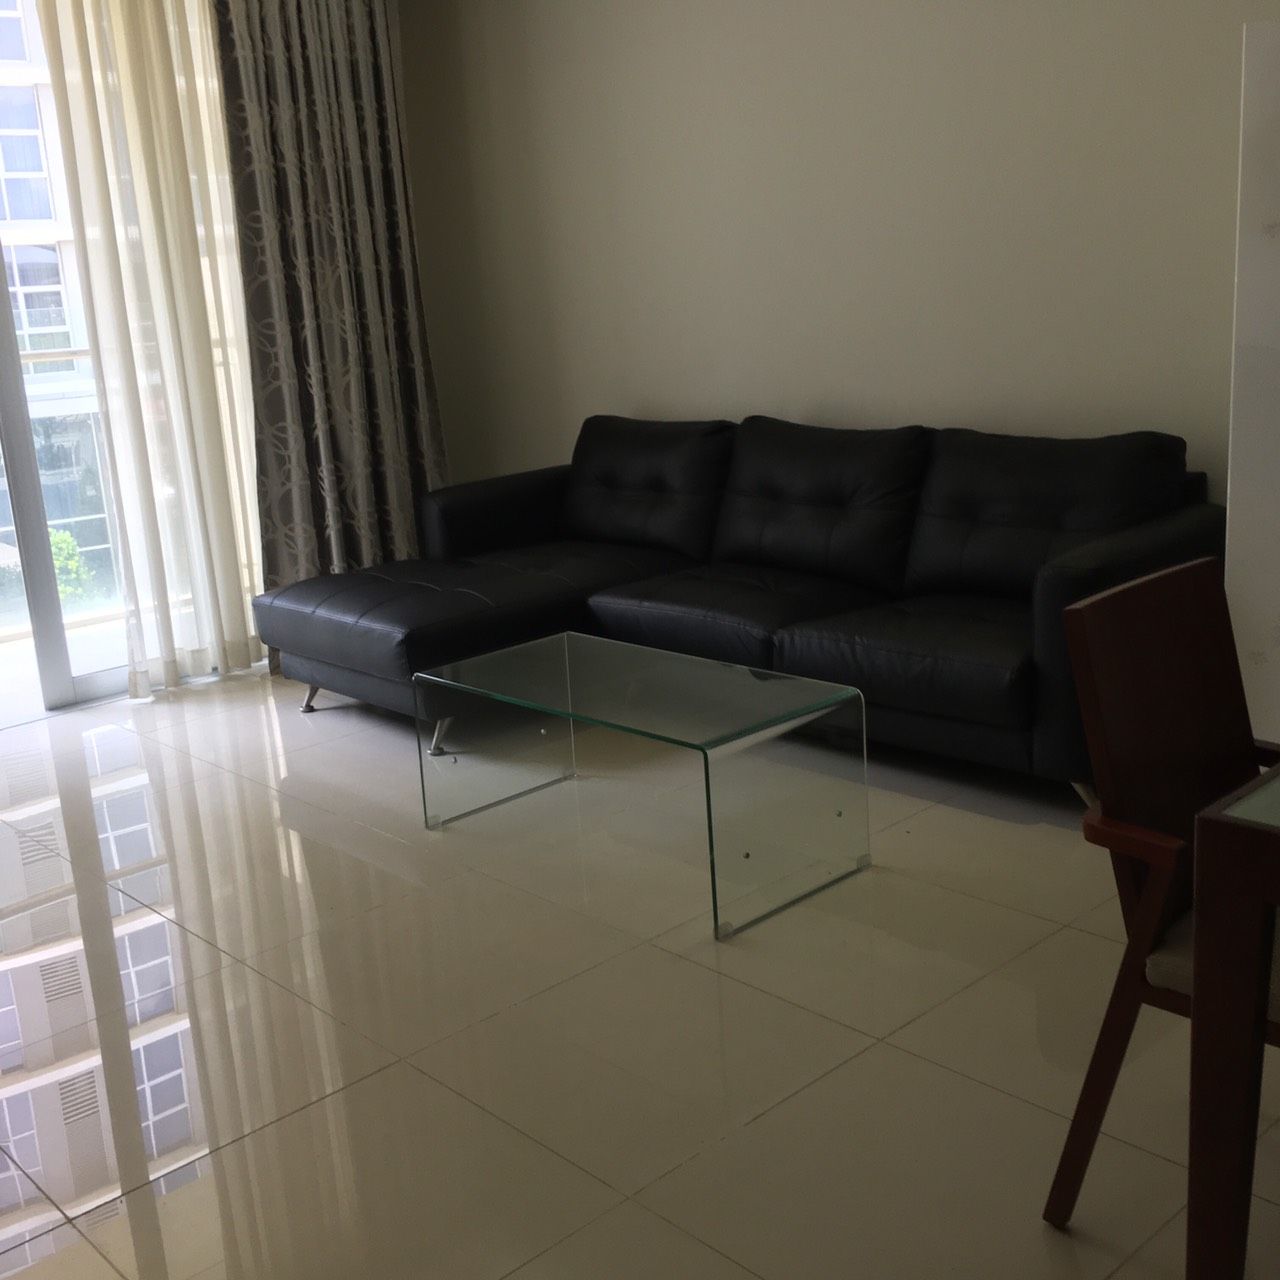 Hot! # 16 Million VND, Rent Saigon Airport Plaza apartment 2BEDs / 2WCs fully furnished like pics attched